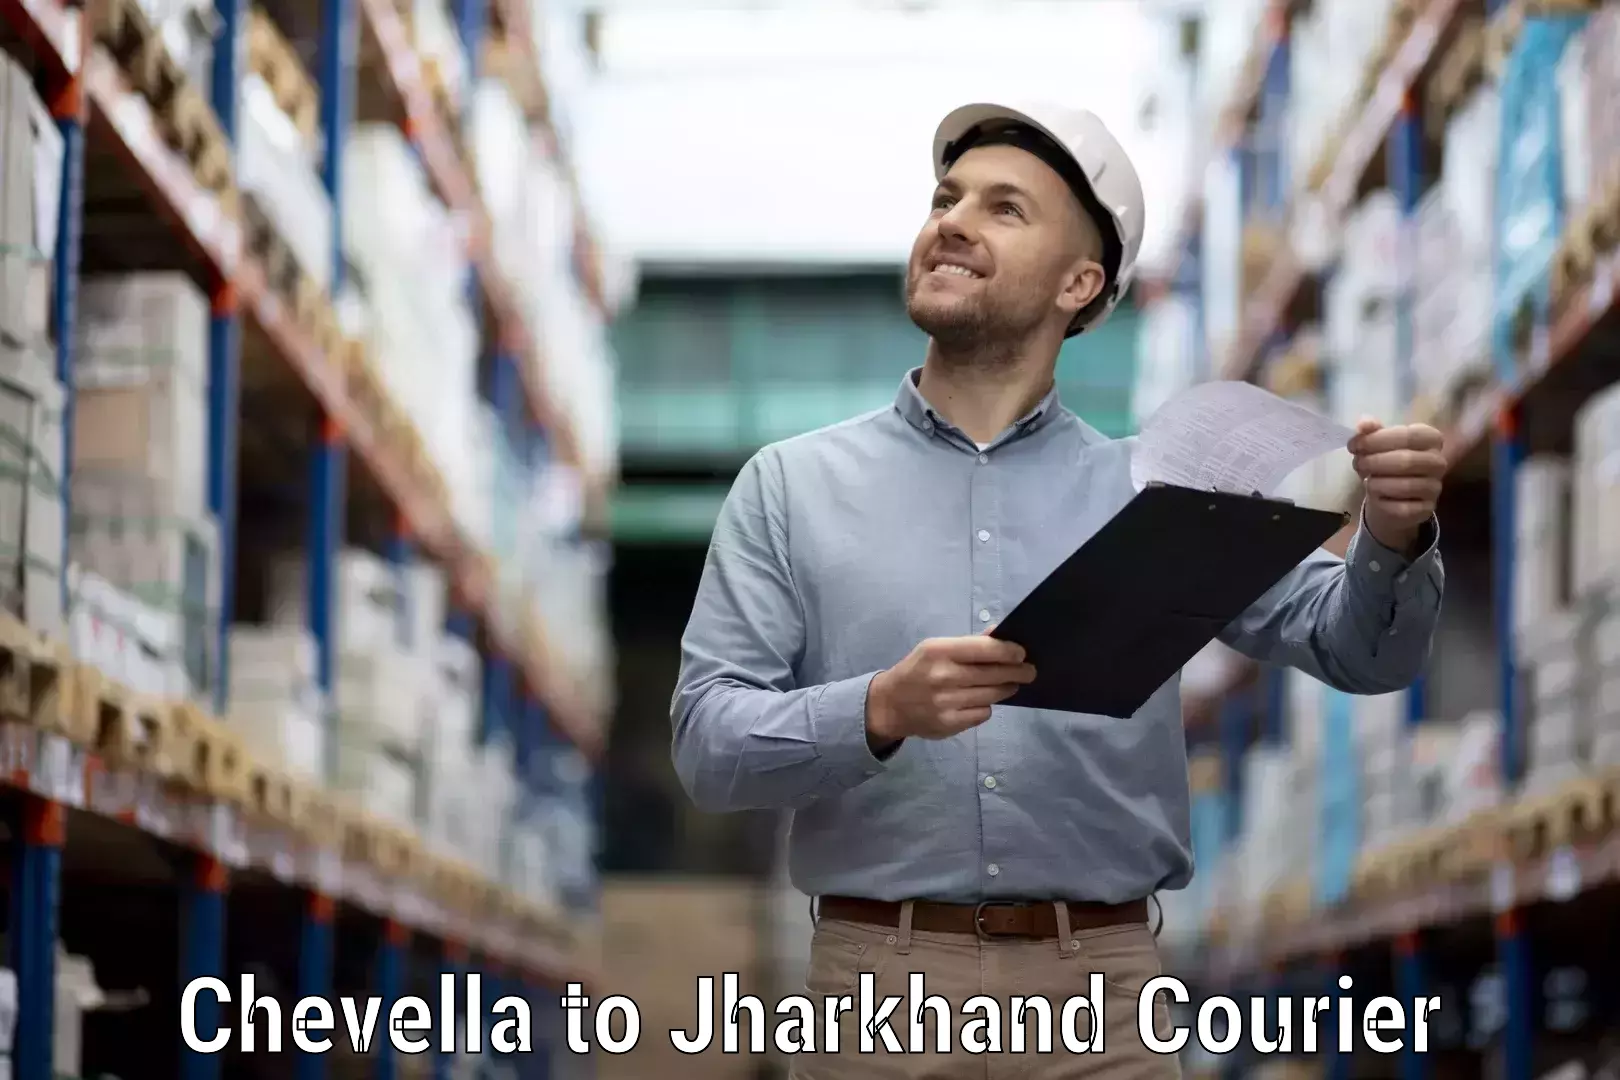 Optimized delivery routes Chevella to Jamshedpur